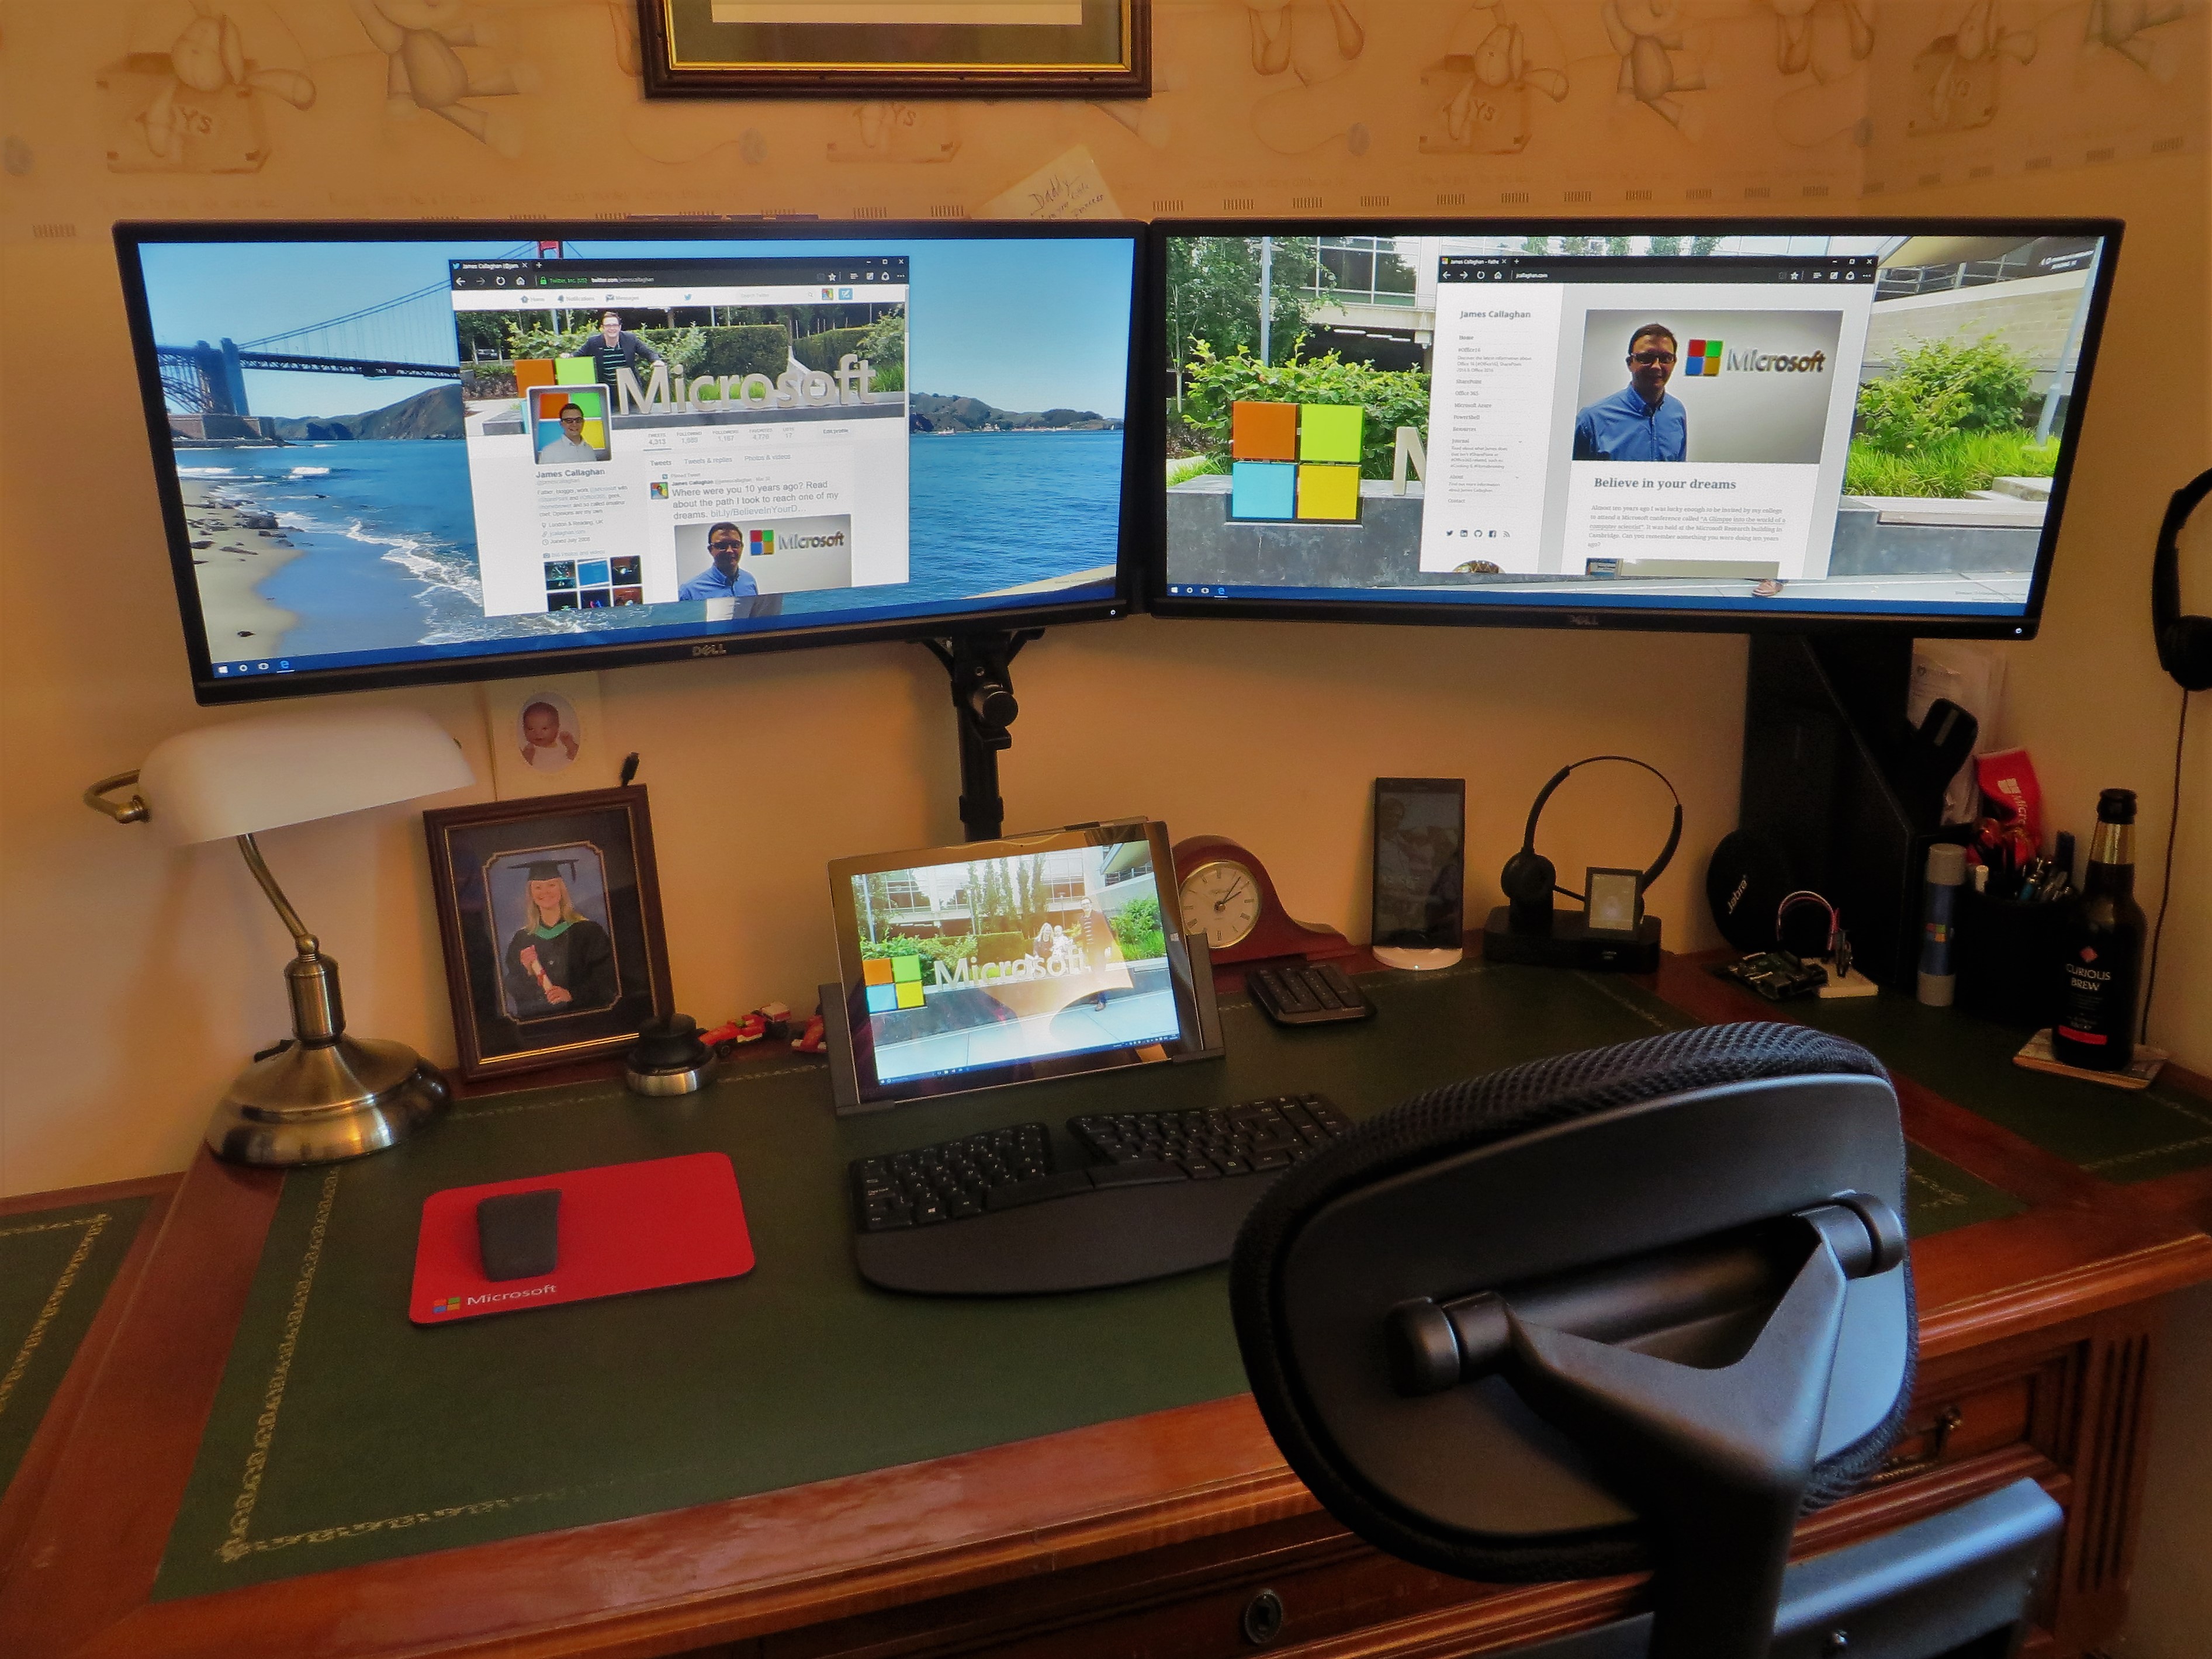 How to daisy chain multiple monitors on a Surface Pro 3